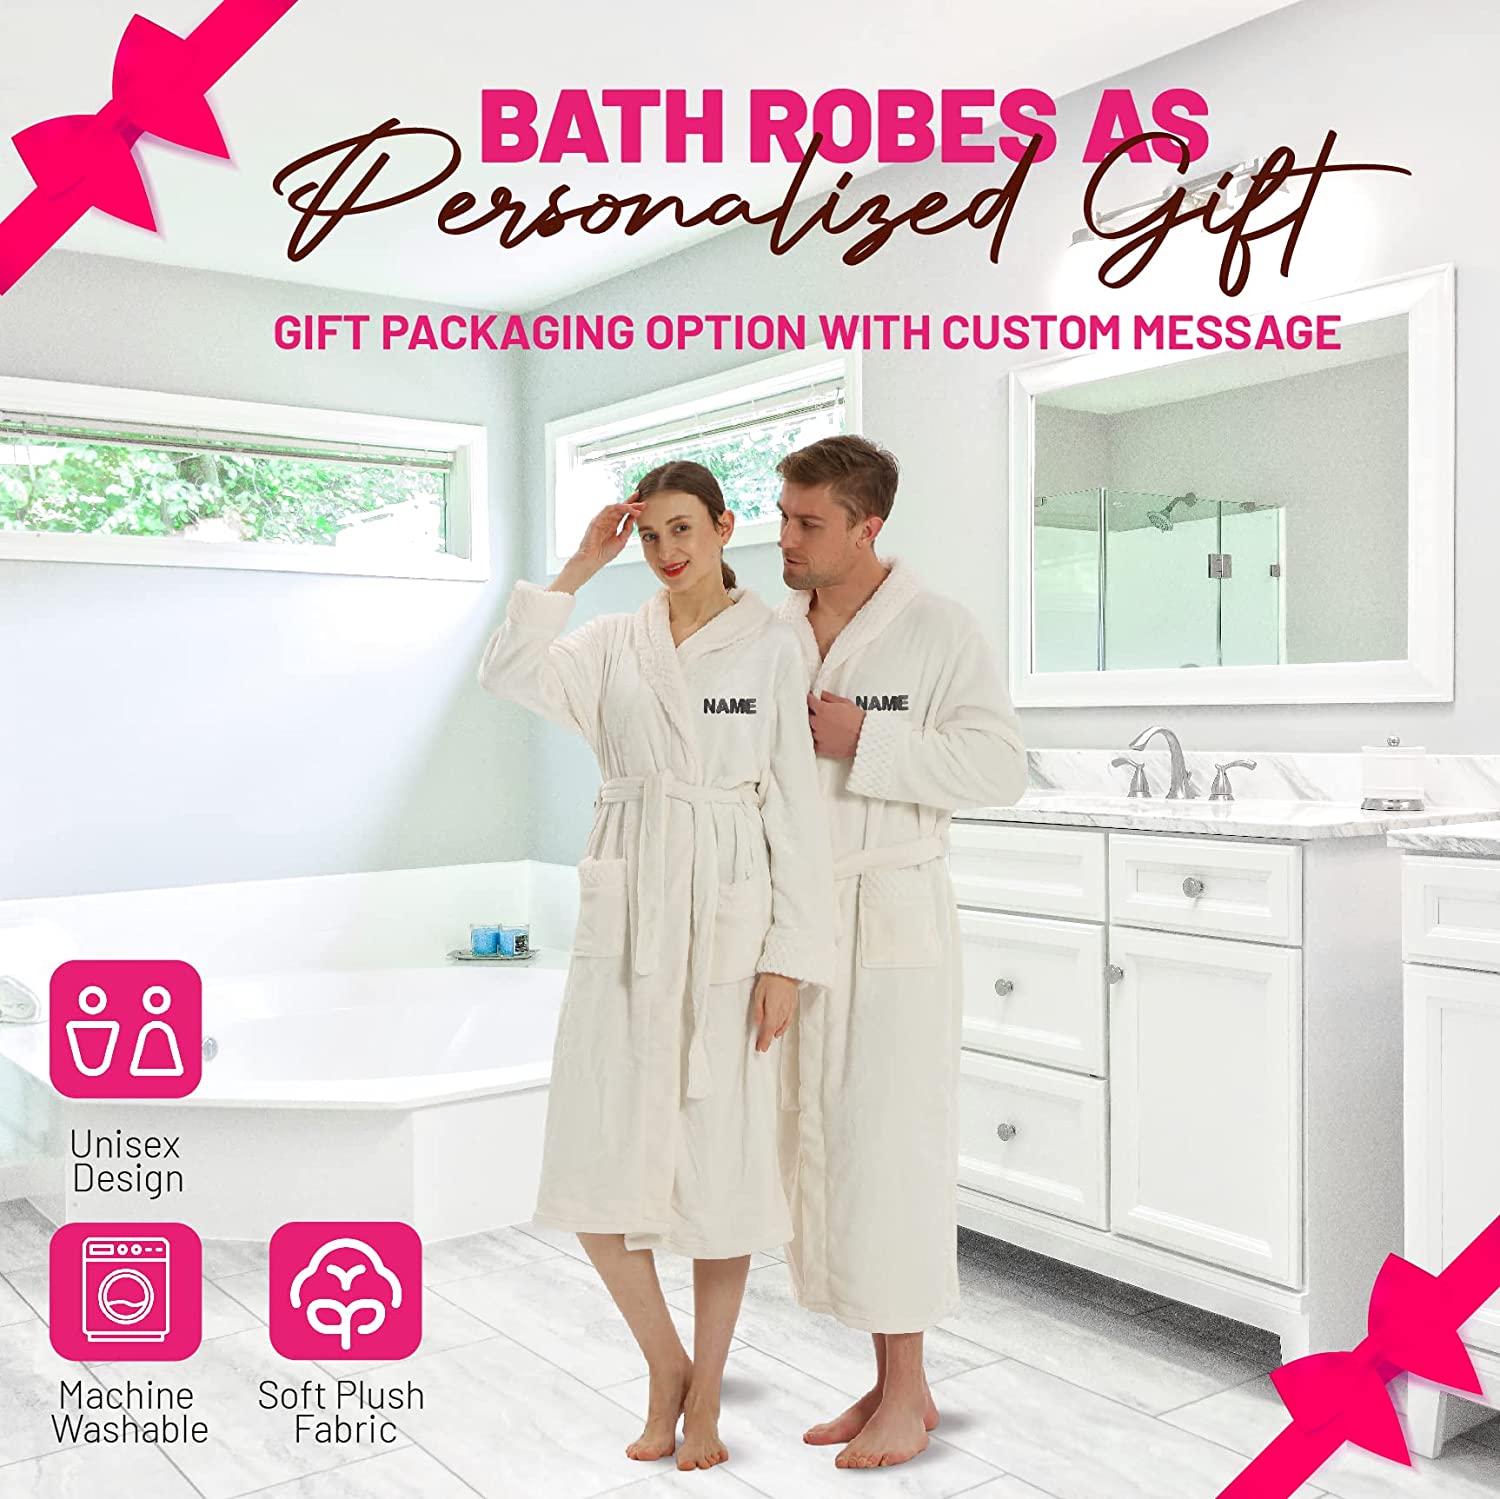 Personalized Passion - Custom Bath Robes, Sleepwear, and Baby Gifts